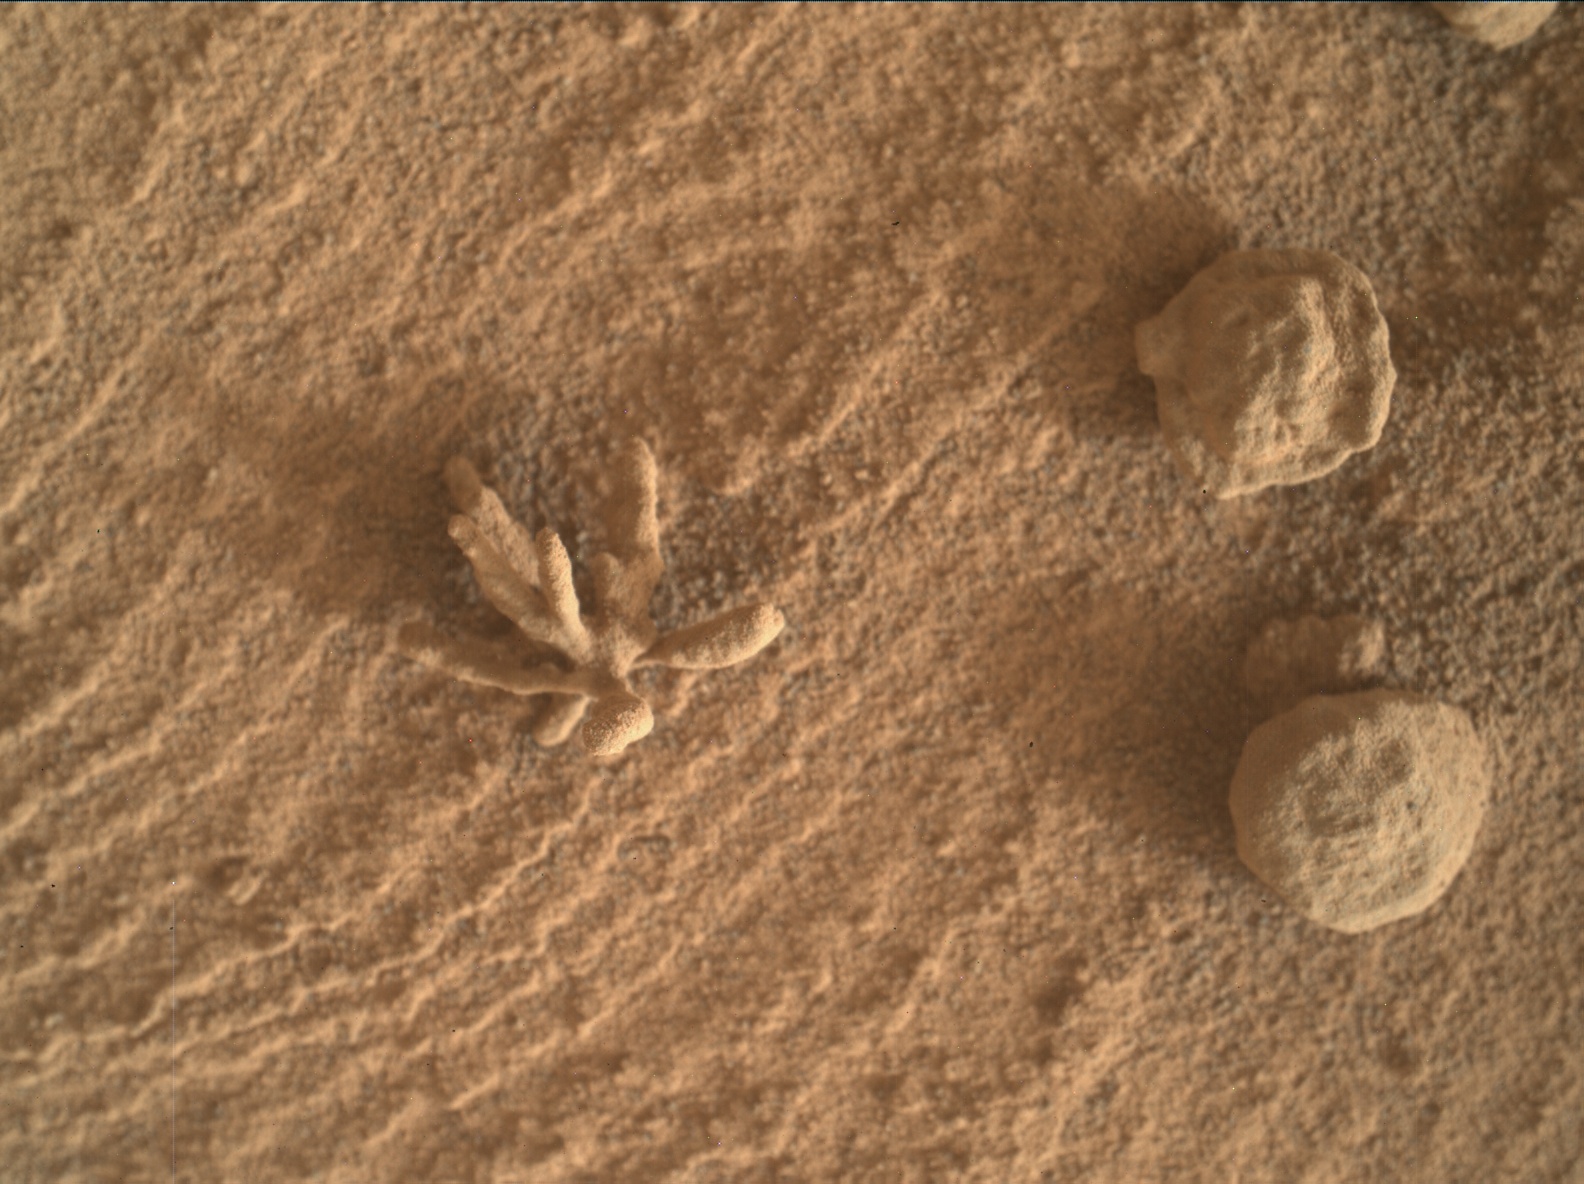 Nasa's Mars rover Curiosity acquired this image using its Mars Hand Lens Imager (MAHLI) on Sol 3396